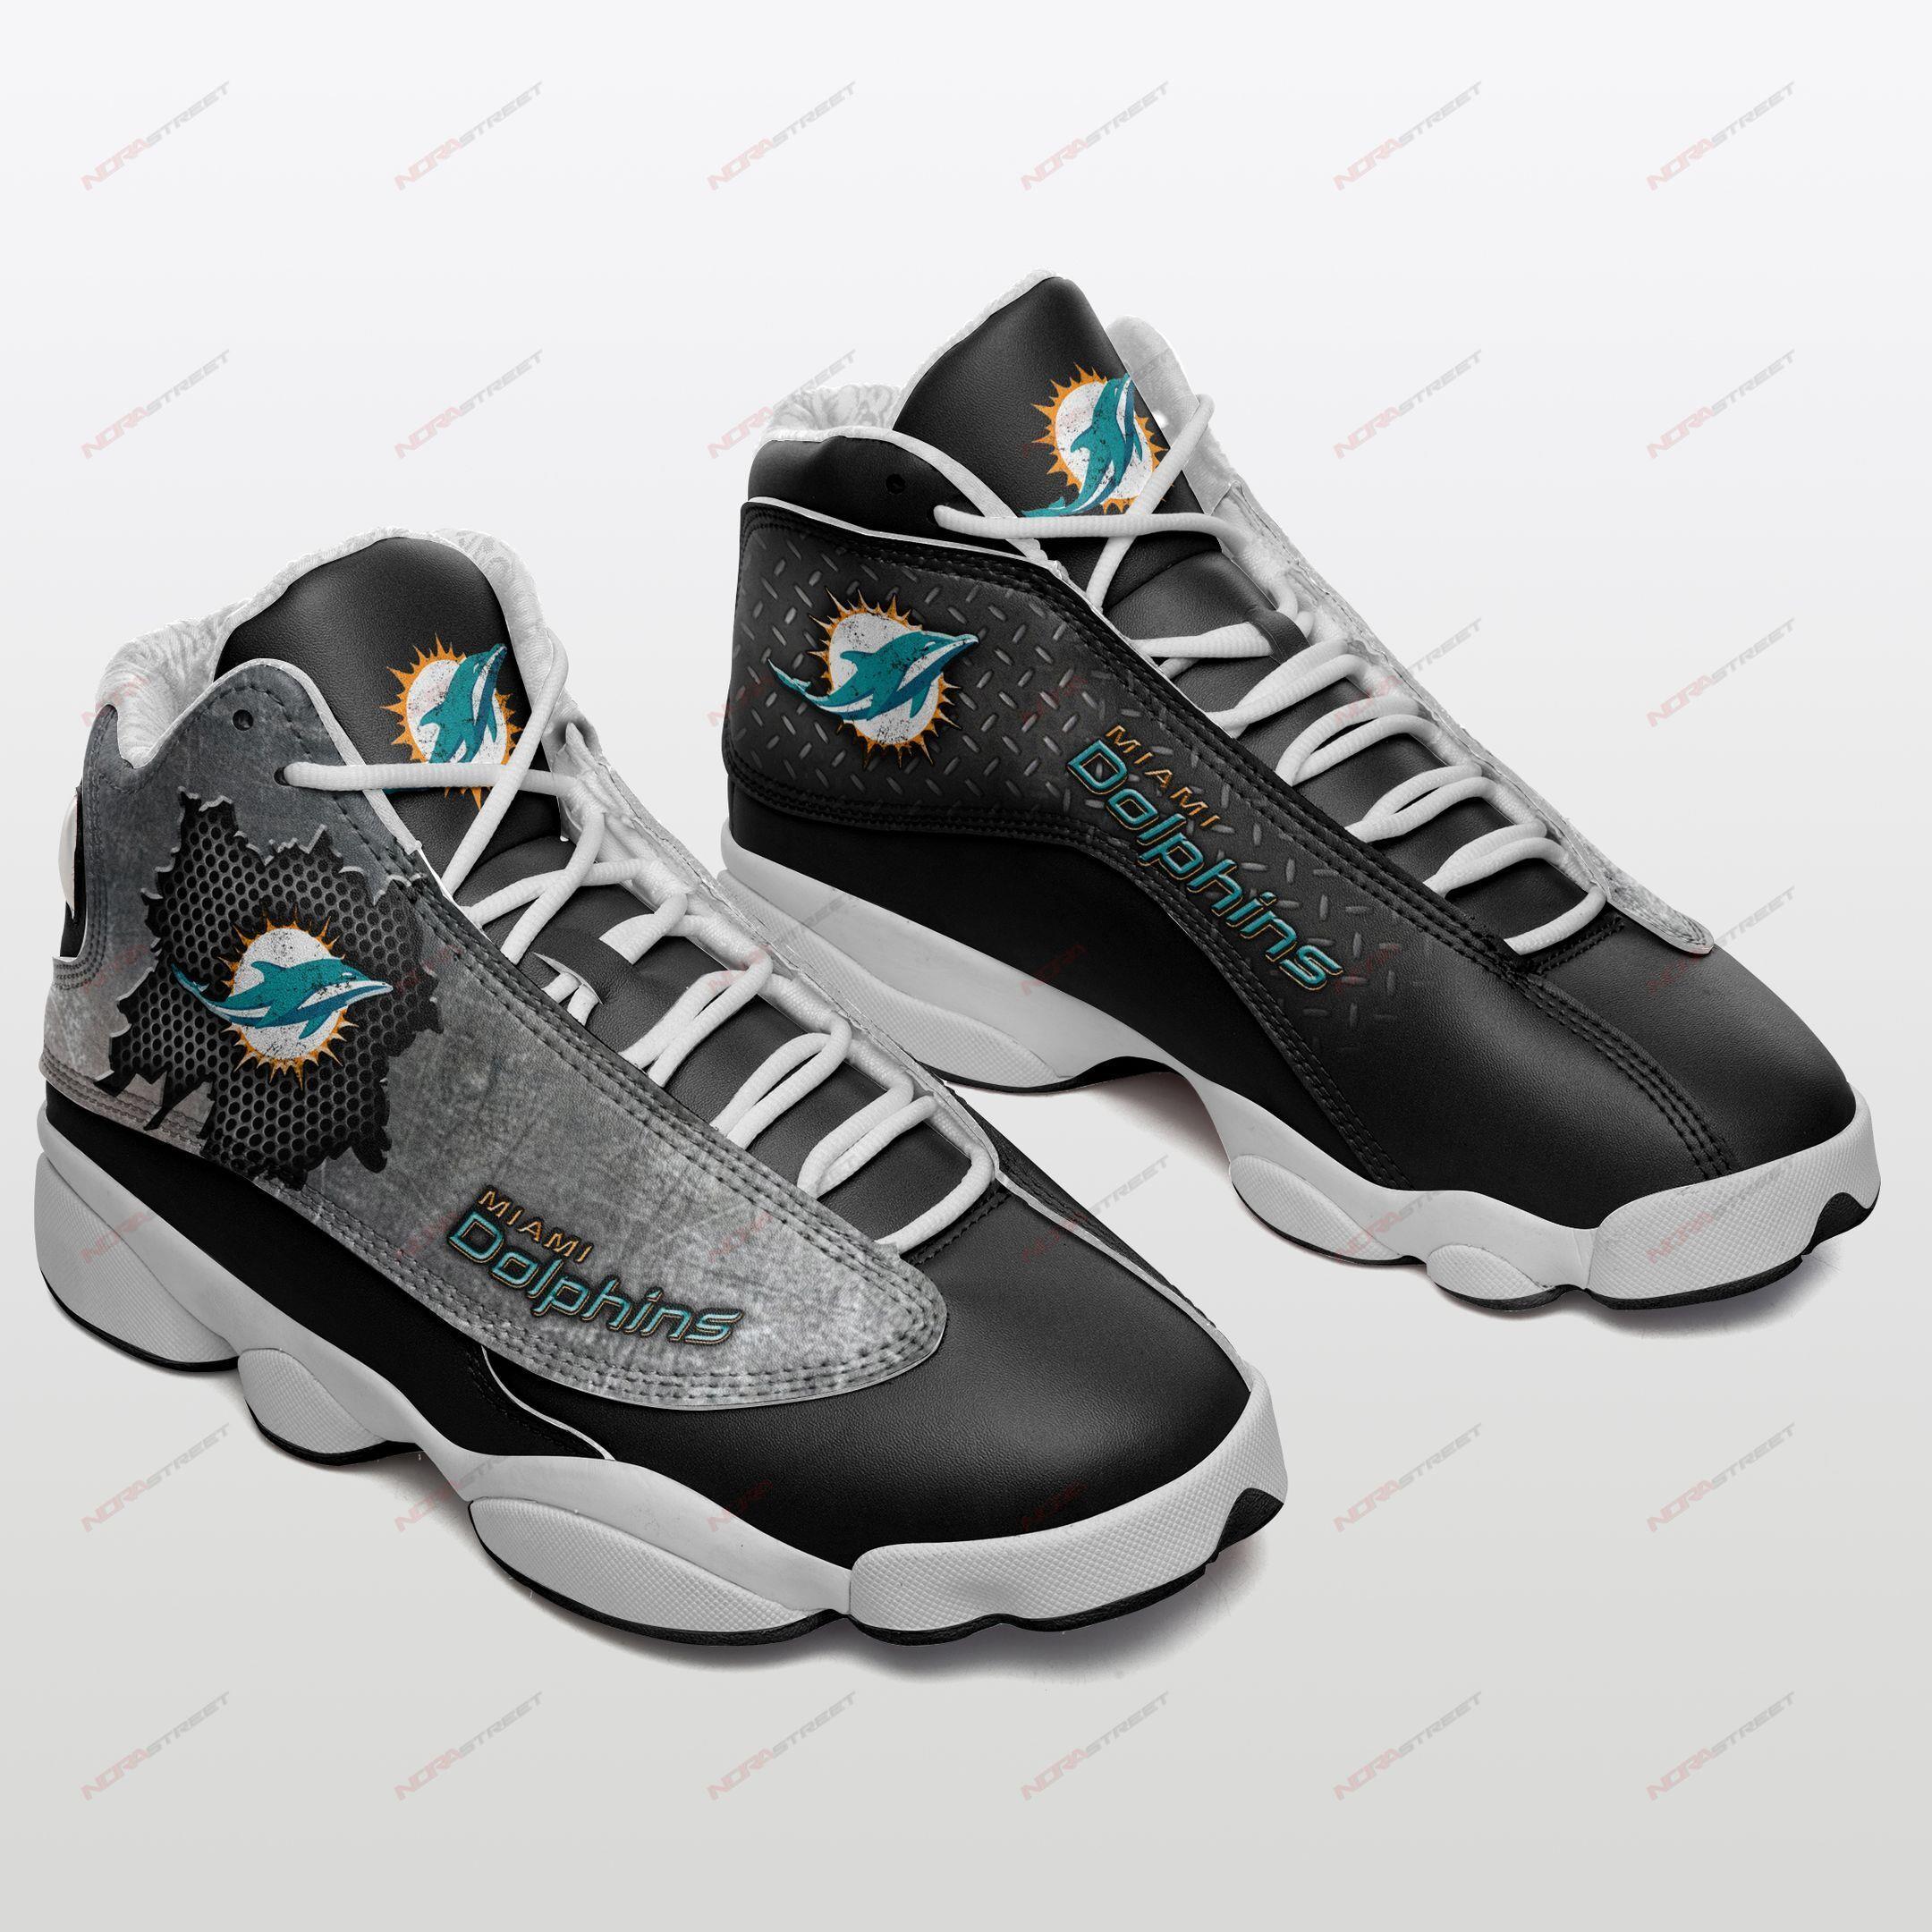 Miami Dolphins Air Jordan 13 Sneakers Sport Shoes Full Size